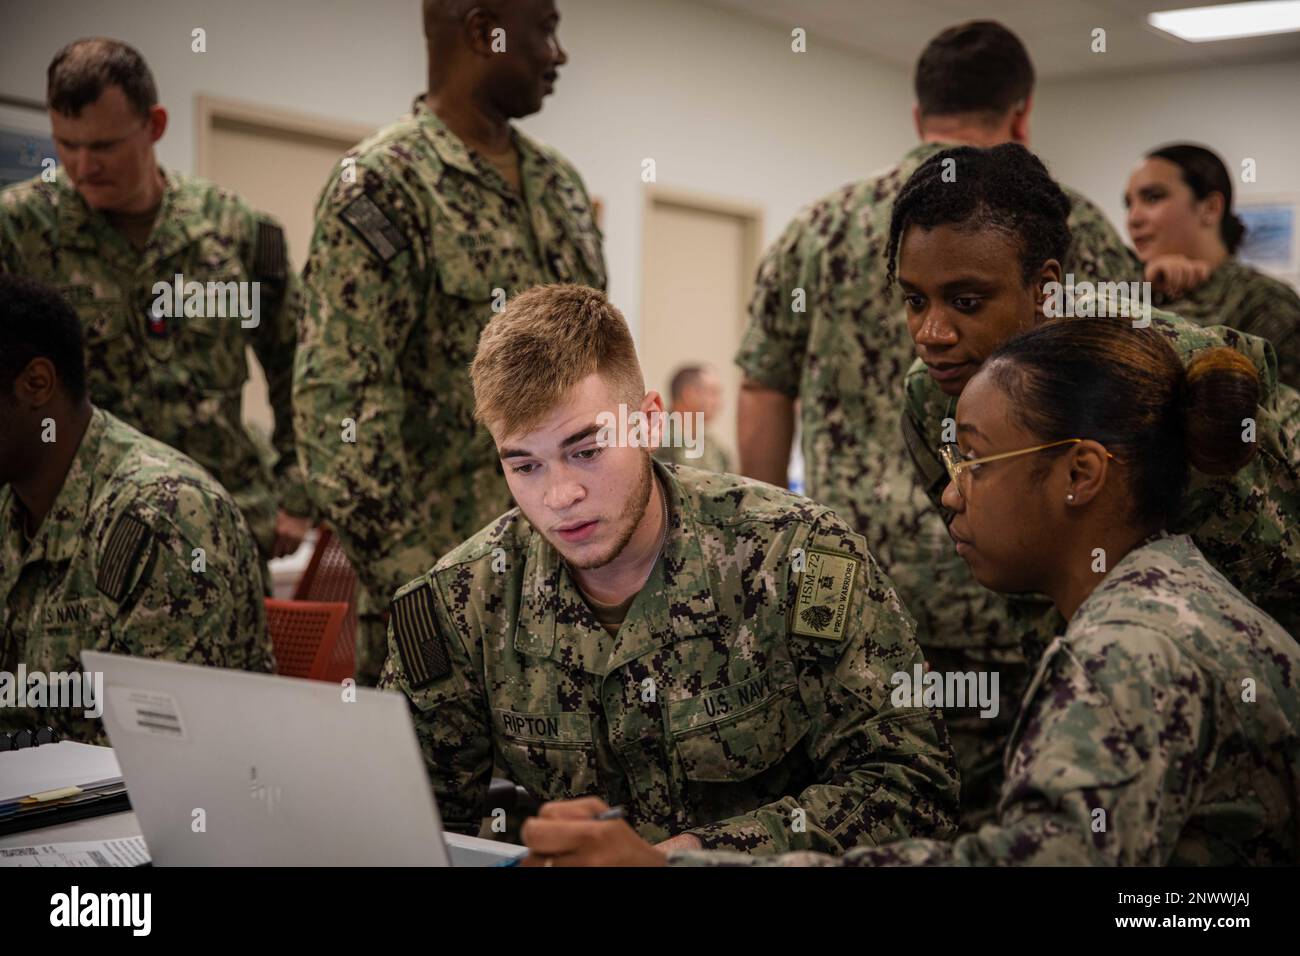 230201-N-GF955-1019  NAVAL AIR STATION JACKSONVILLE, Fla. (Feb. 1, 2023) Airman Caleb Ripton, assigned to Helicopter Maritime Strike Squadron (HSM) 72, looks at open ratings during a Professional Apprenticeship Career Track team visit at Naval Air Station Jacksonville, Florida, Feb. 1, 2023. The Fleet Engagement Team met with PACT Sailors during their PACT engagement to provide career counseling, designate ratings and negotiate orders on site. Stock Photo